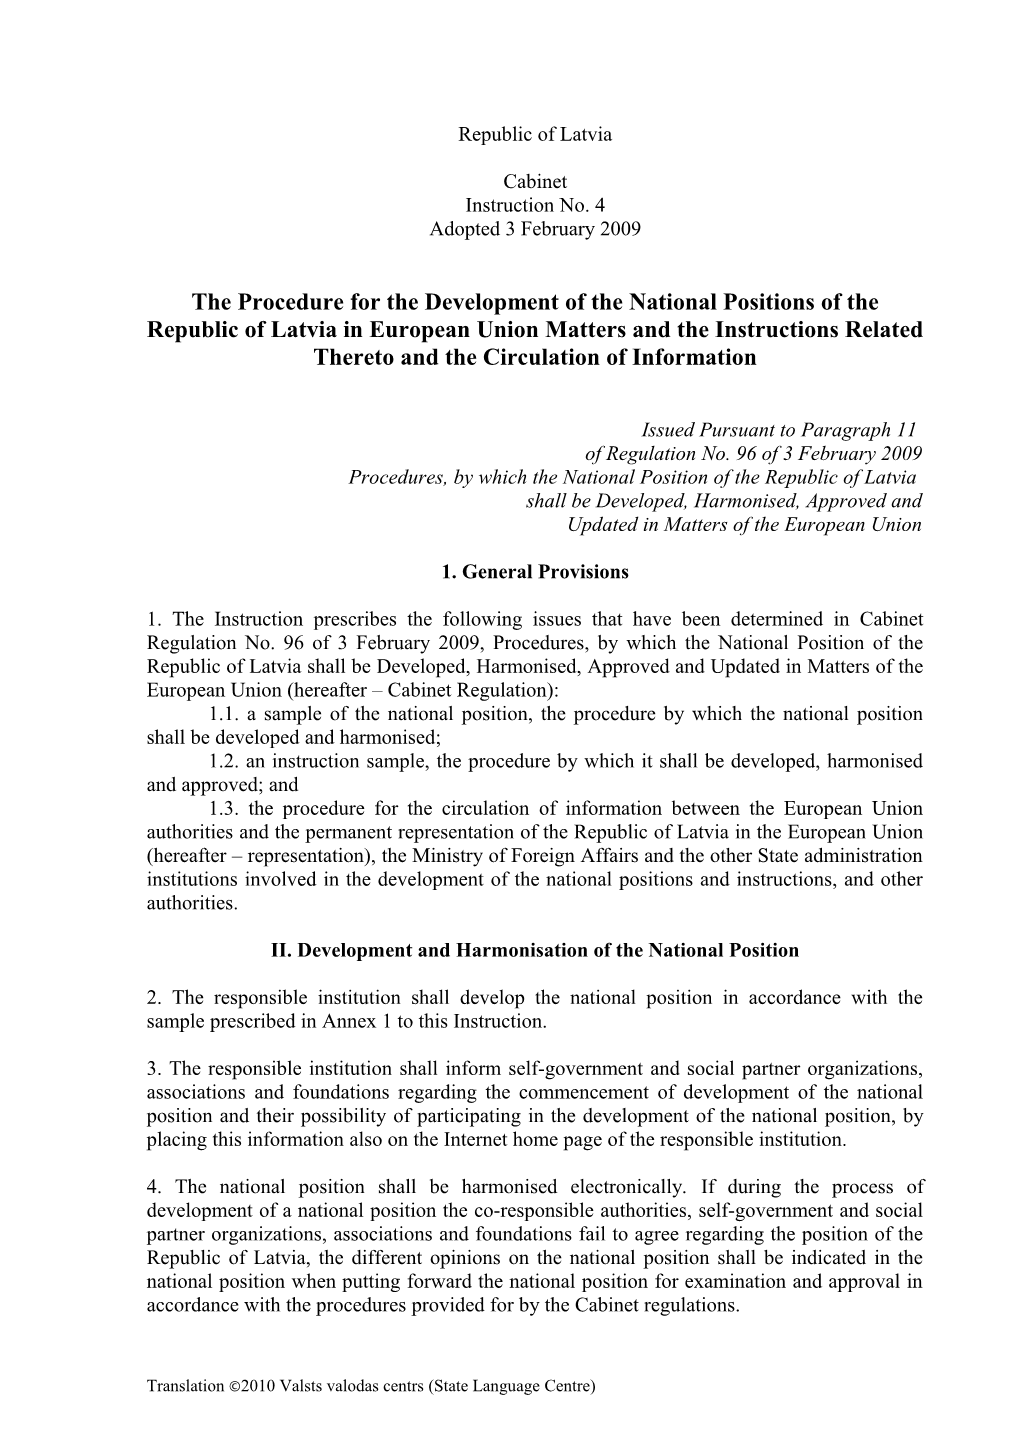 The Procedure for the Development of the National Positions of the Republic of Latvia